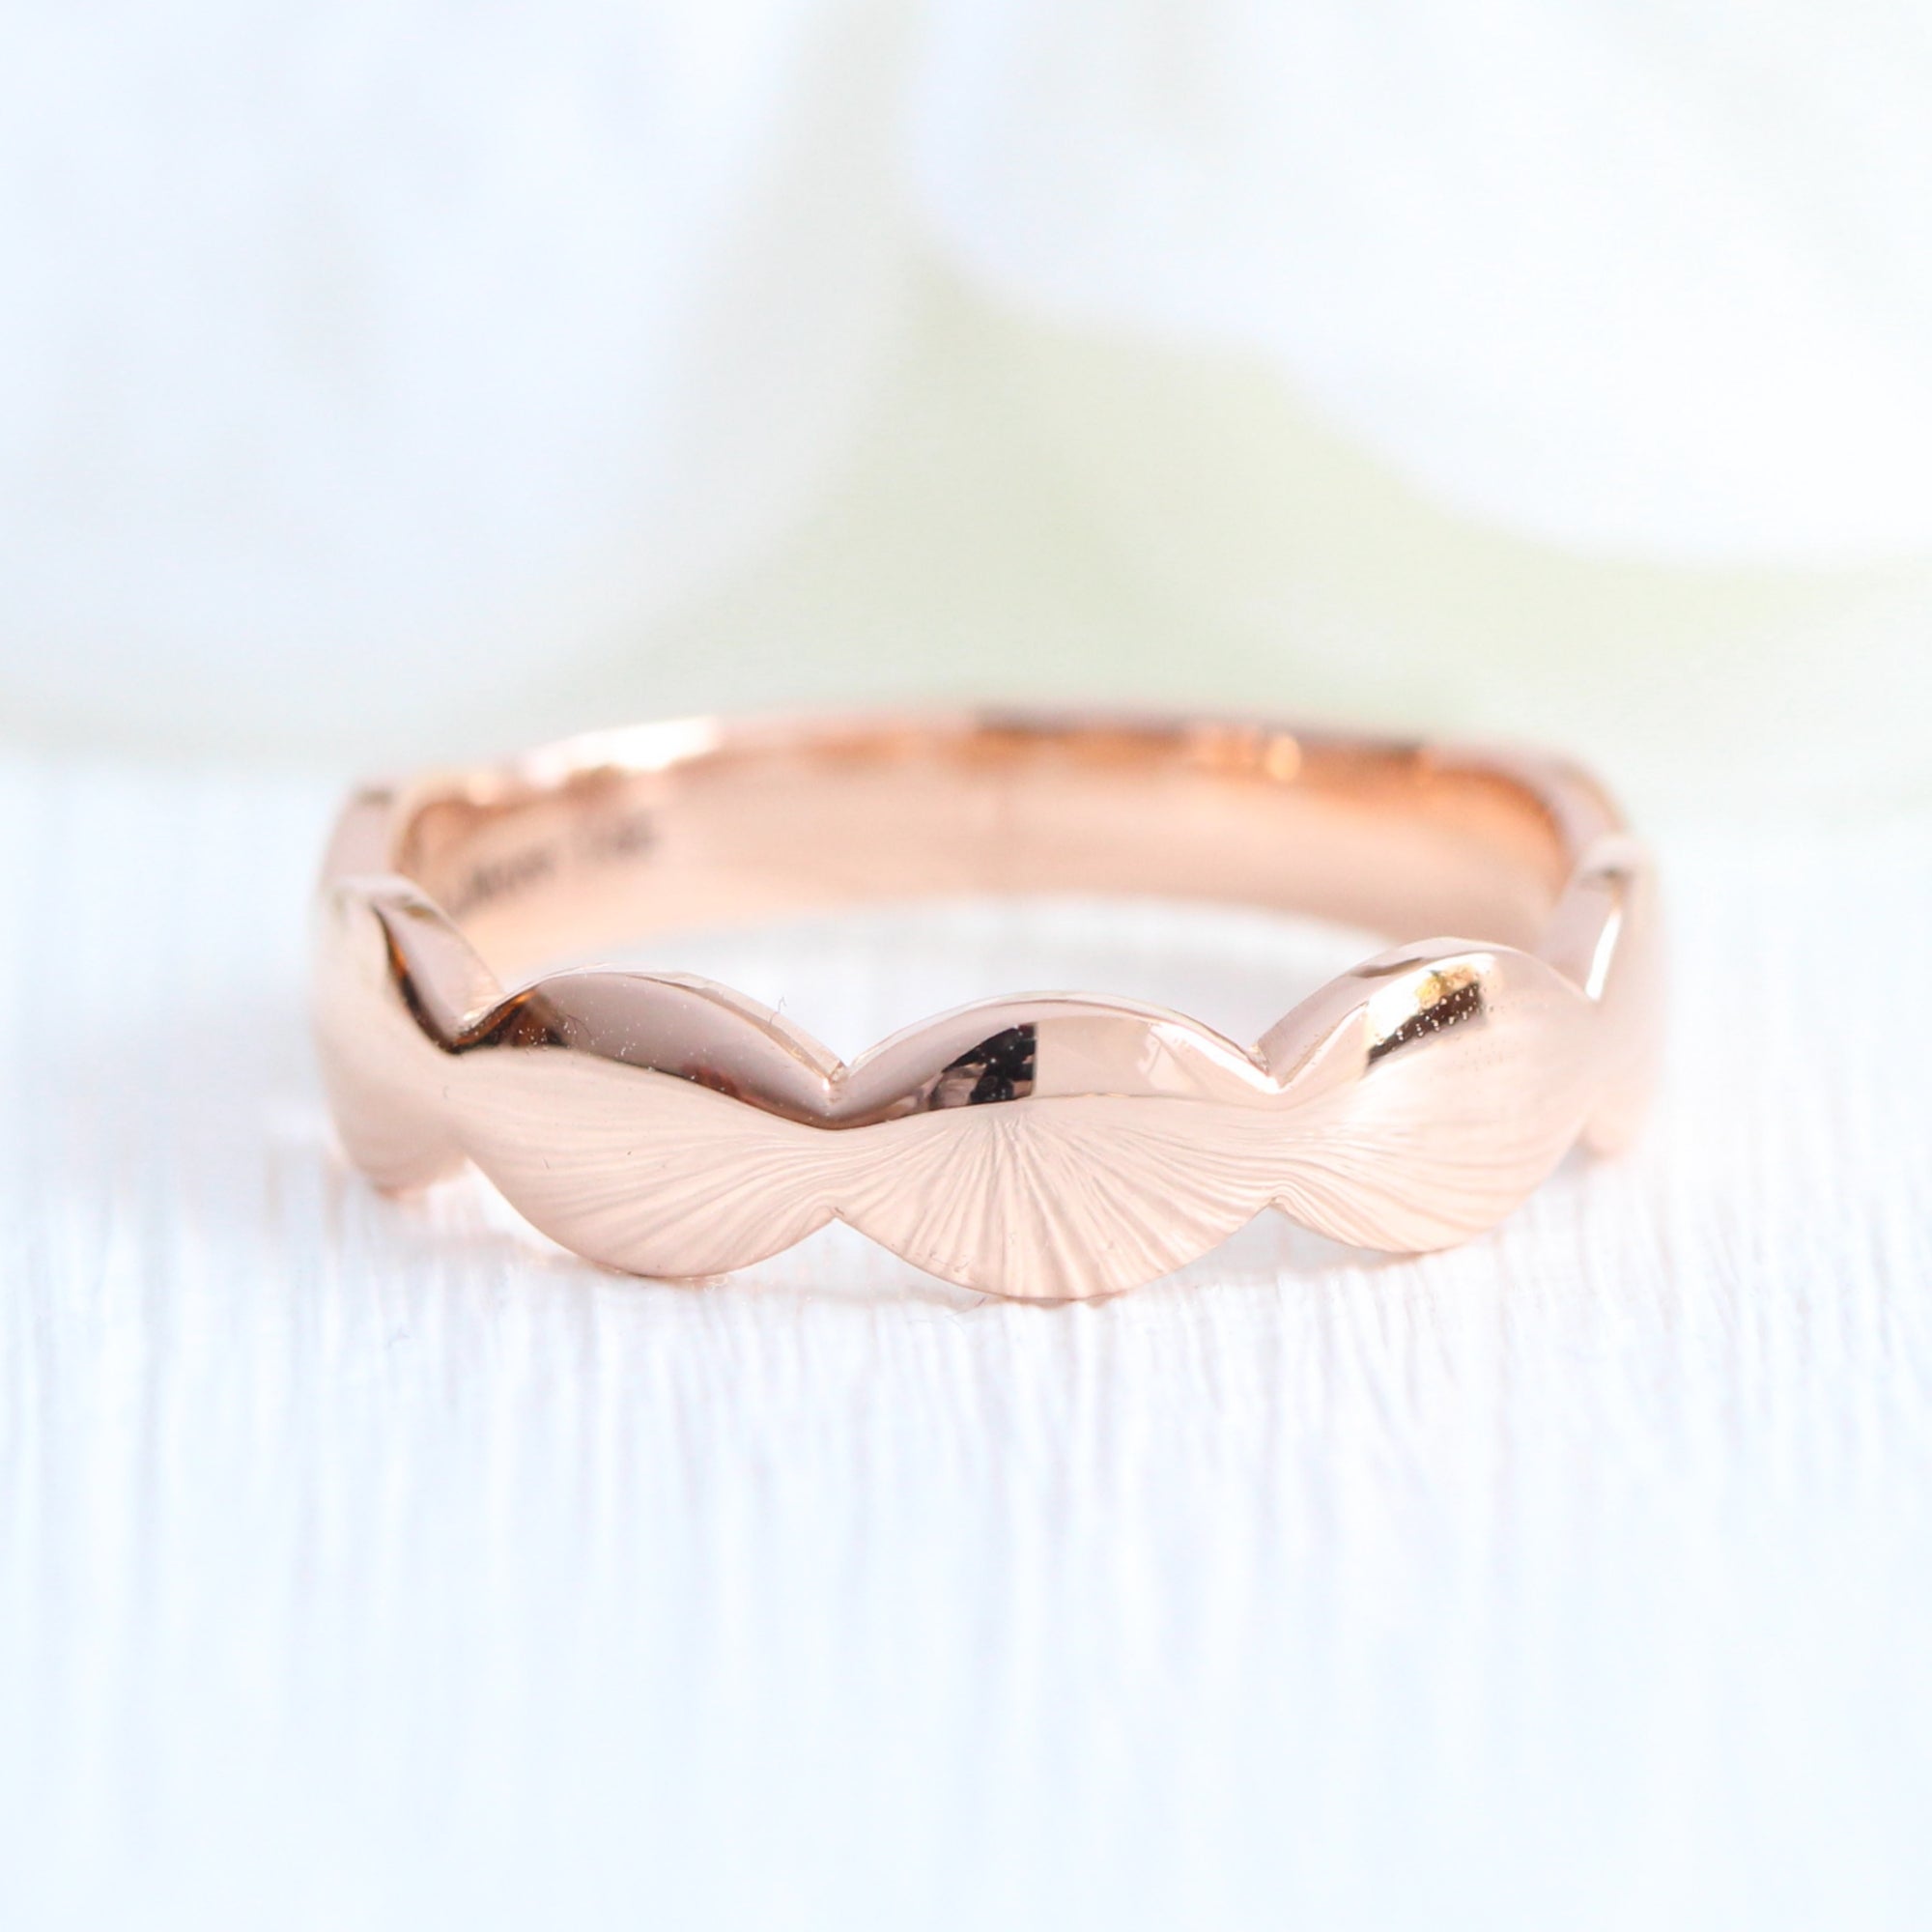 Unique gender neutral wedding ring, scalloped wedding band rose gold wide wedding band la more design jewelry